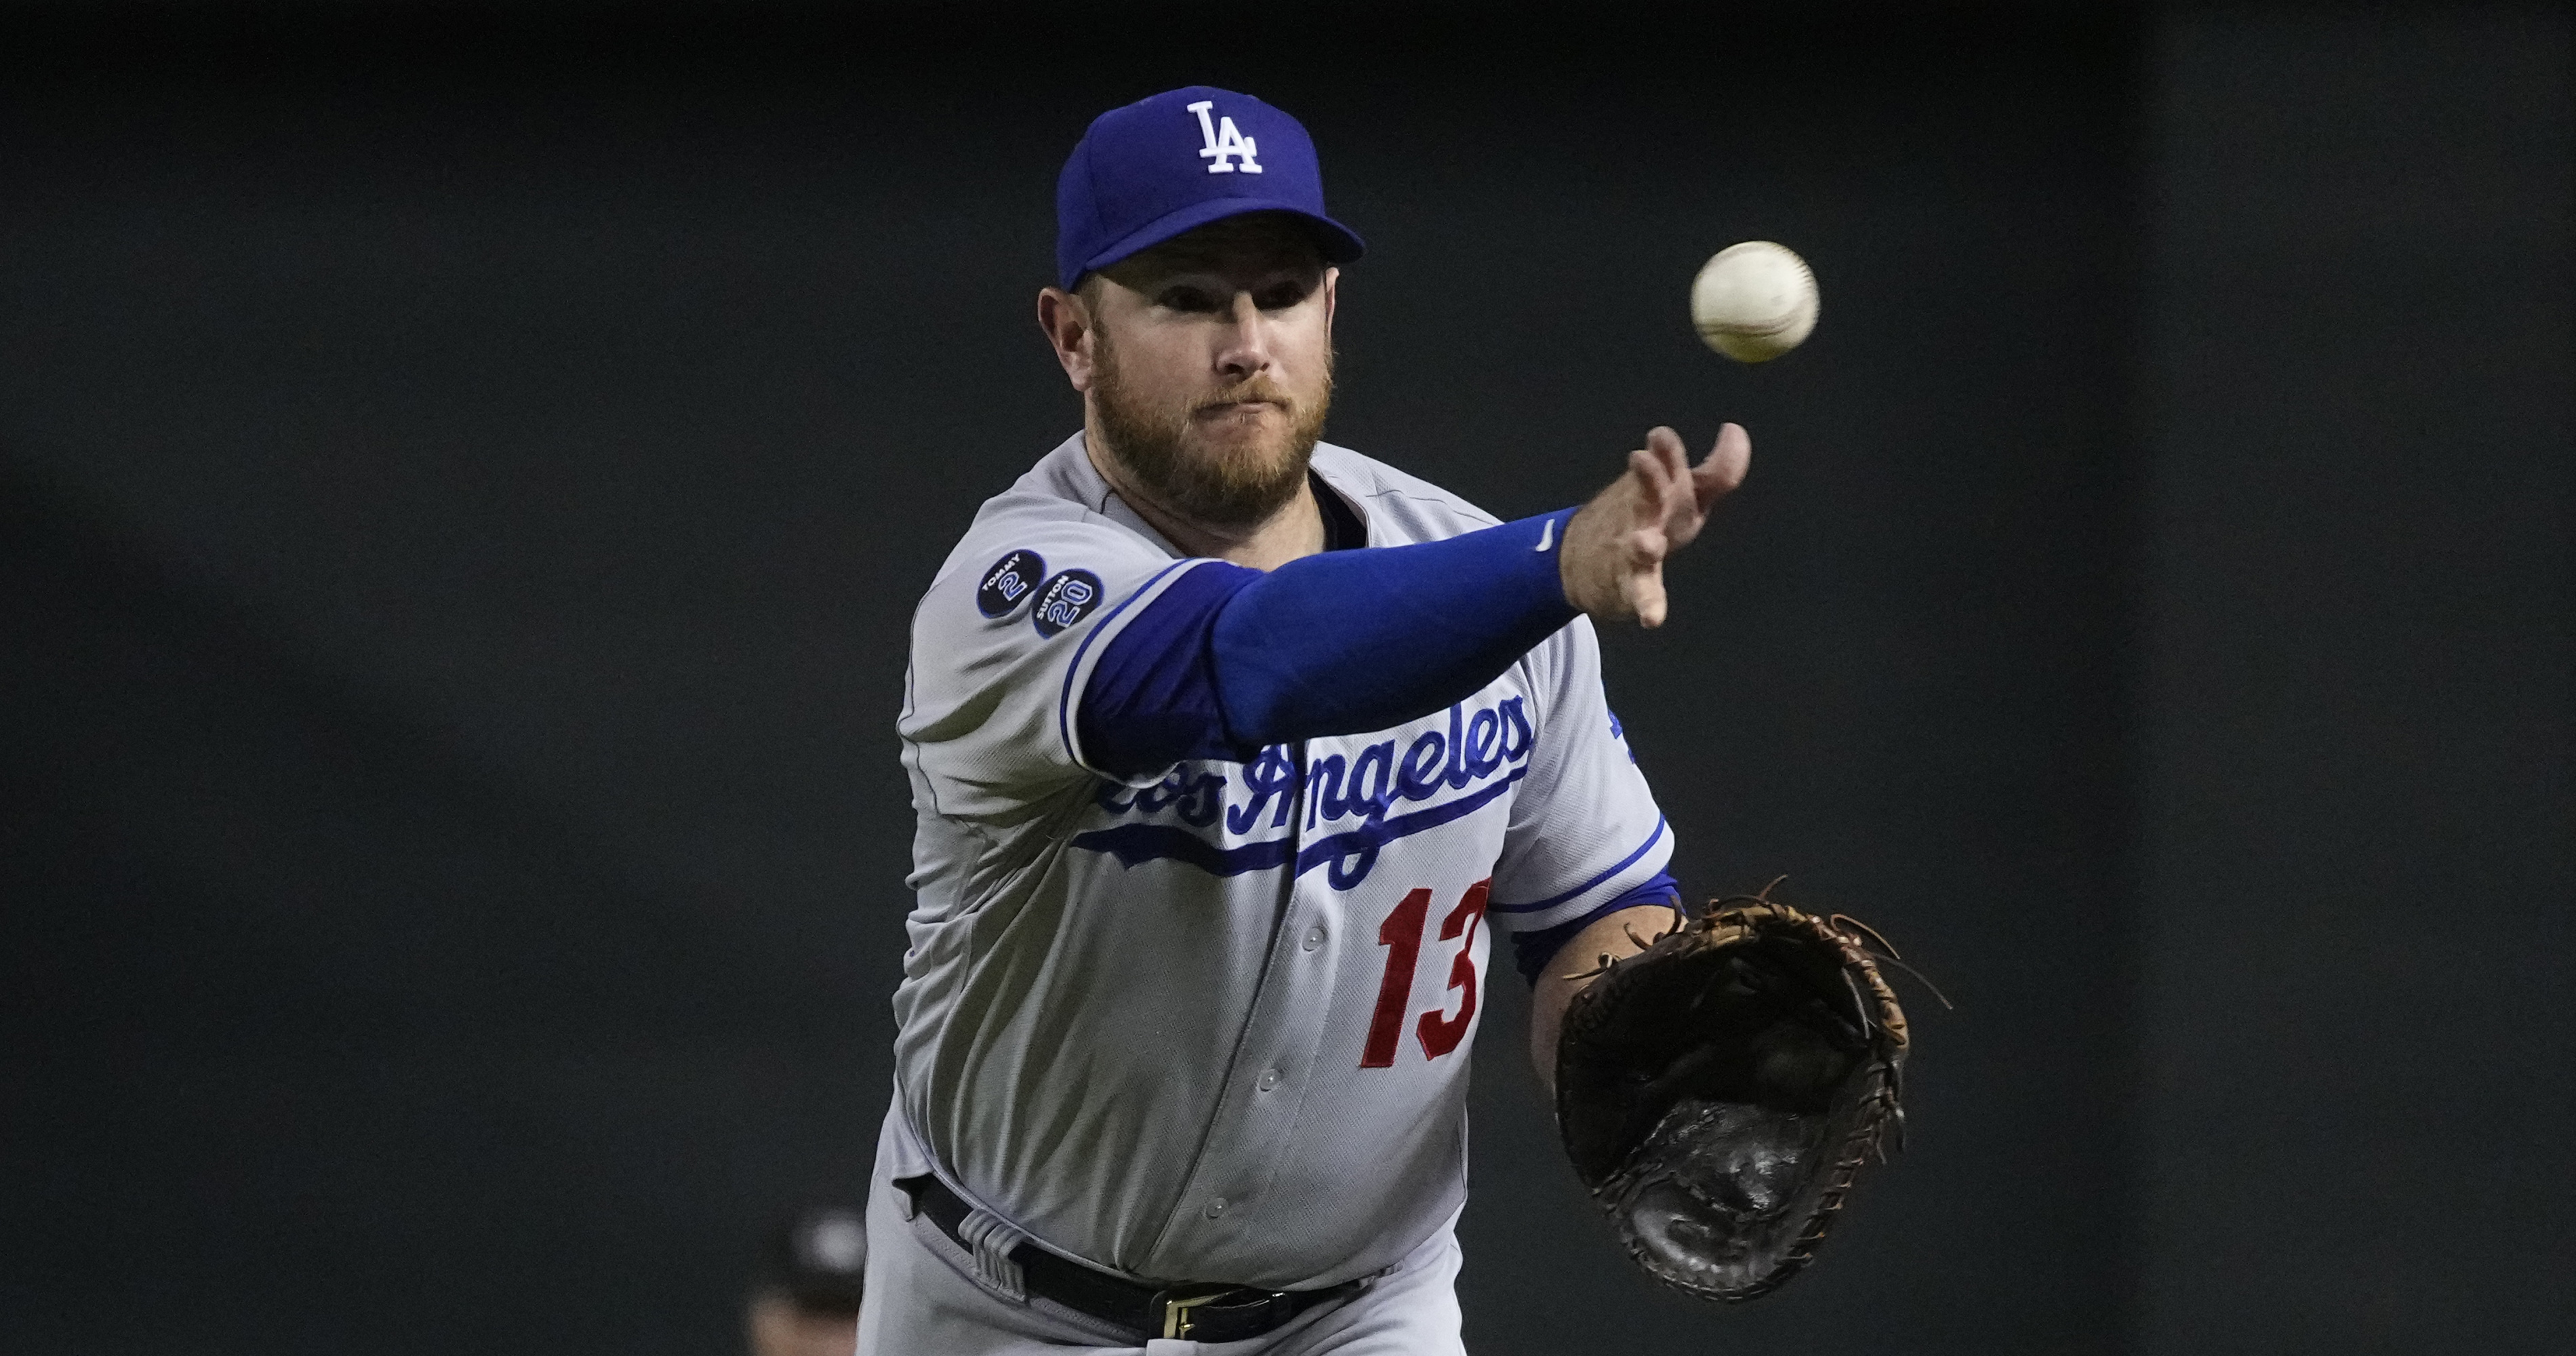 Max Muncy homers, Dave Roberts gets 700th win as manager in